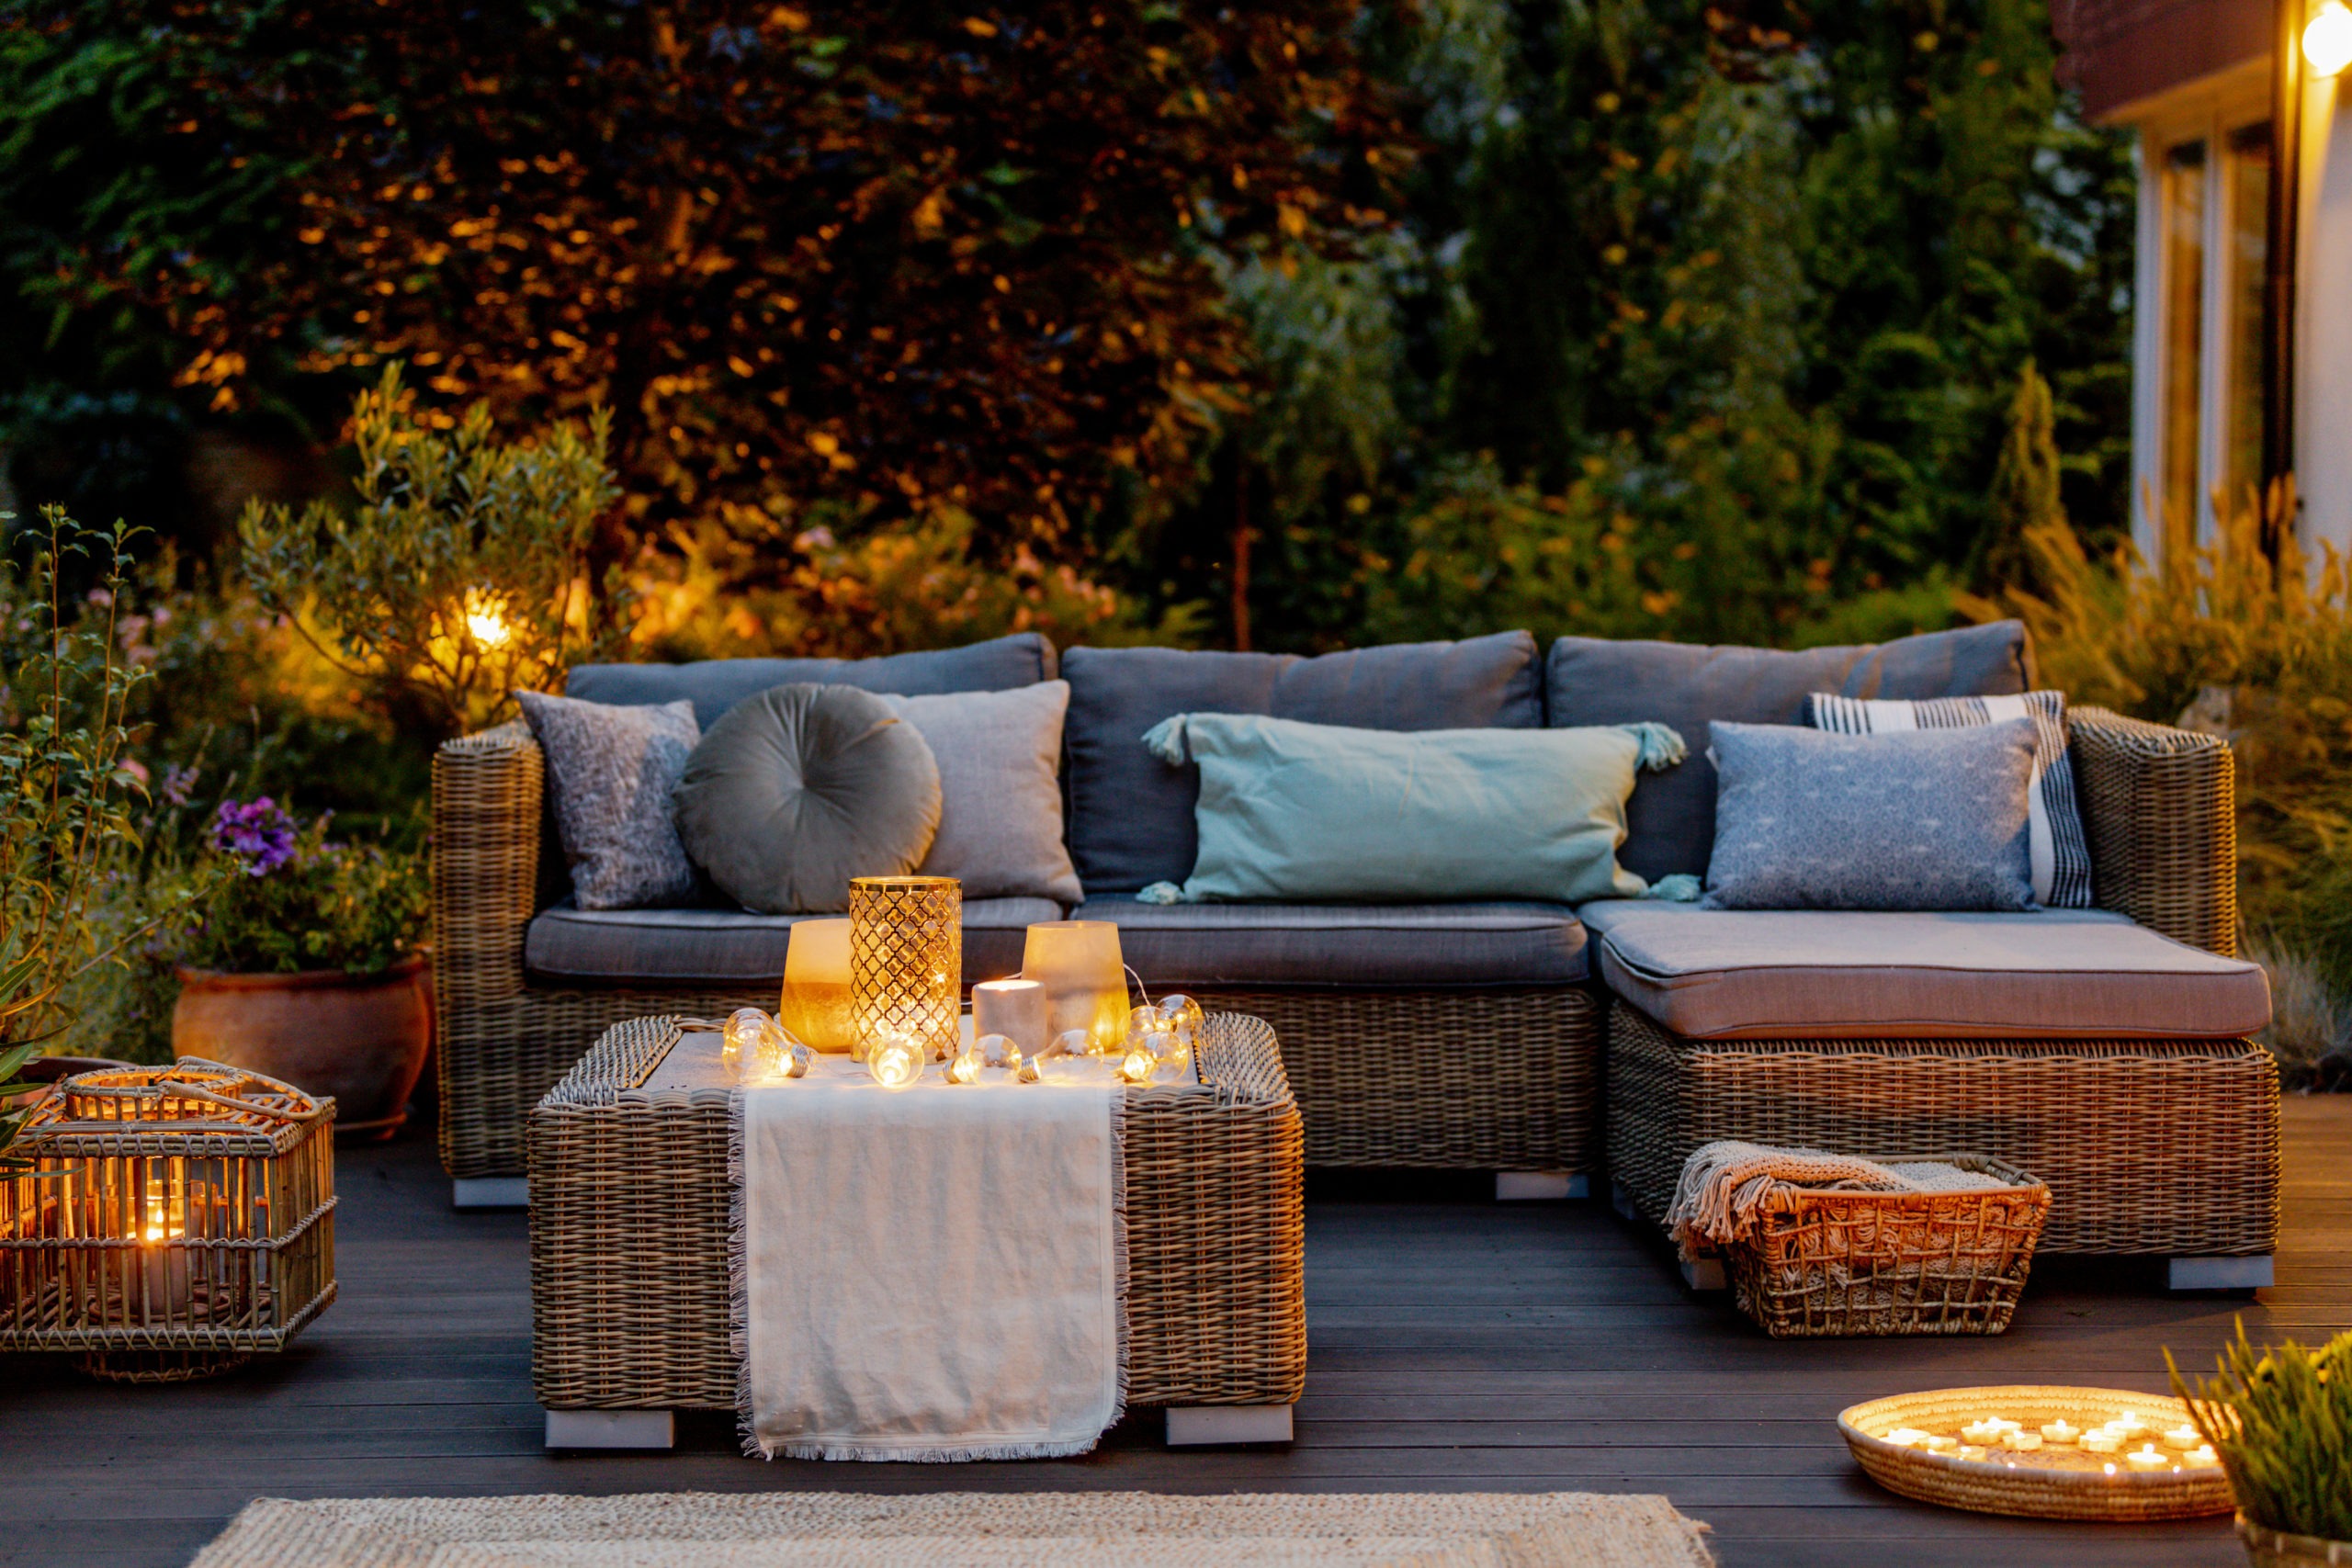 evening time at terrace with rattan furniture, candles on a rattan table